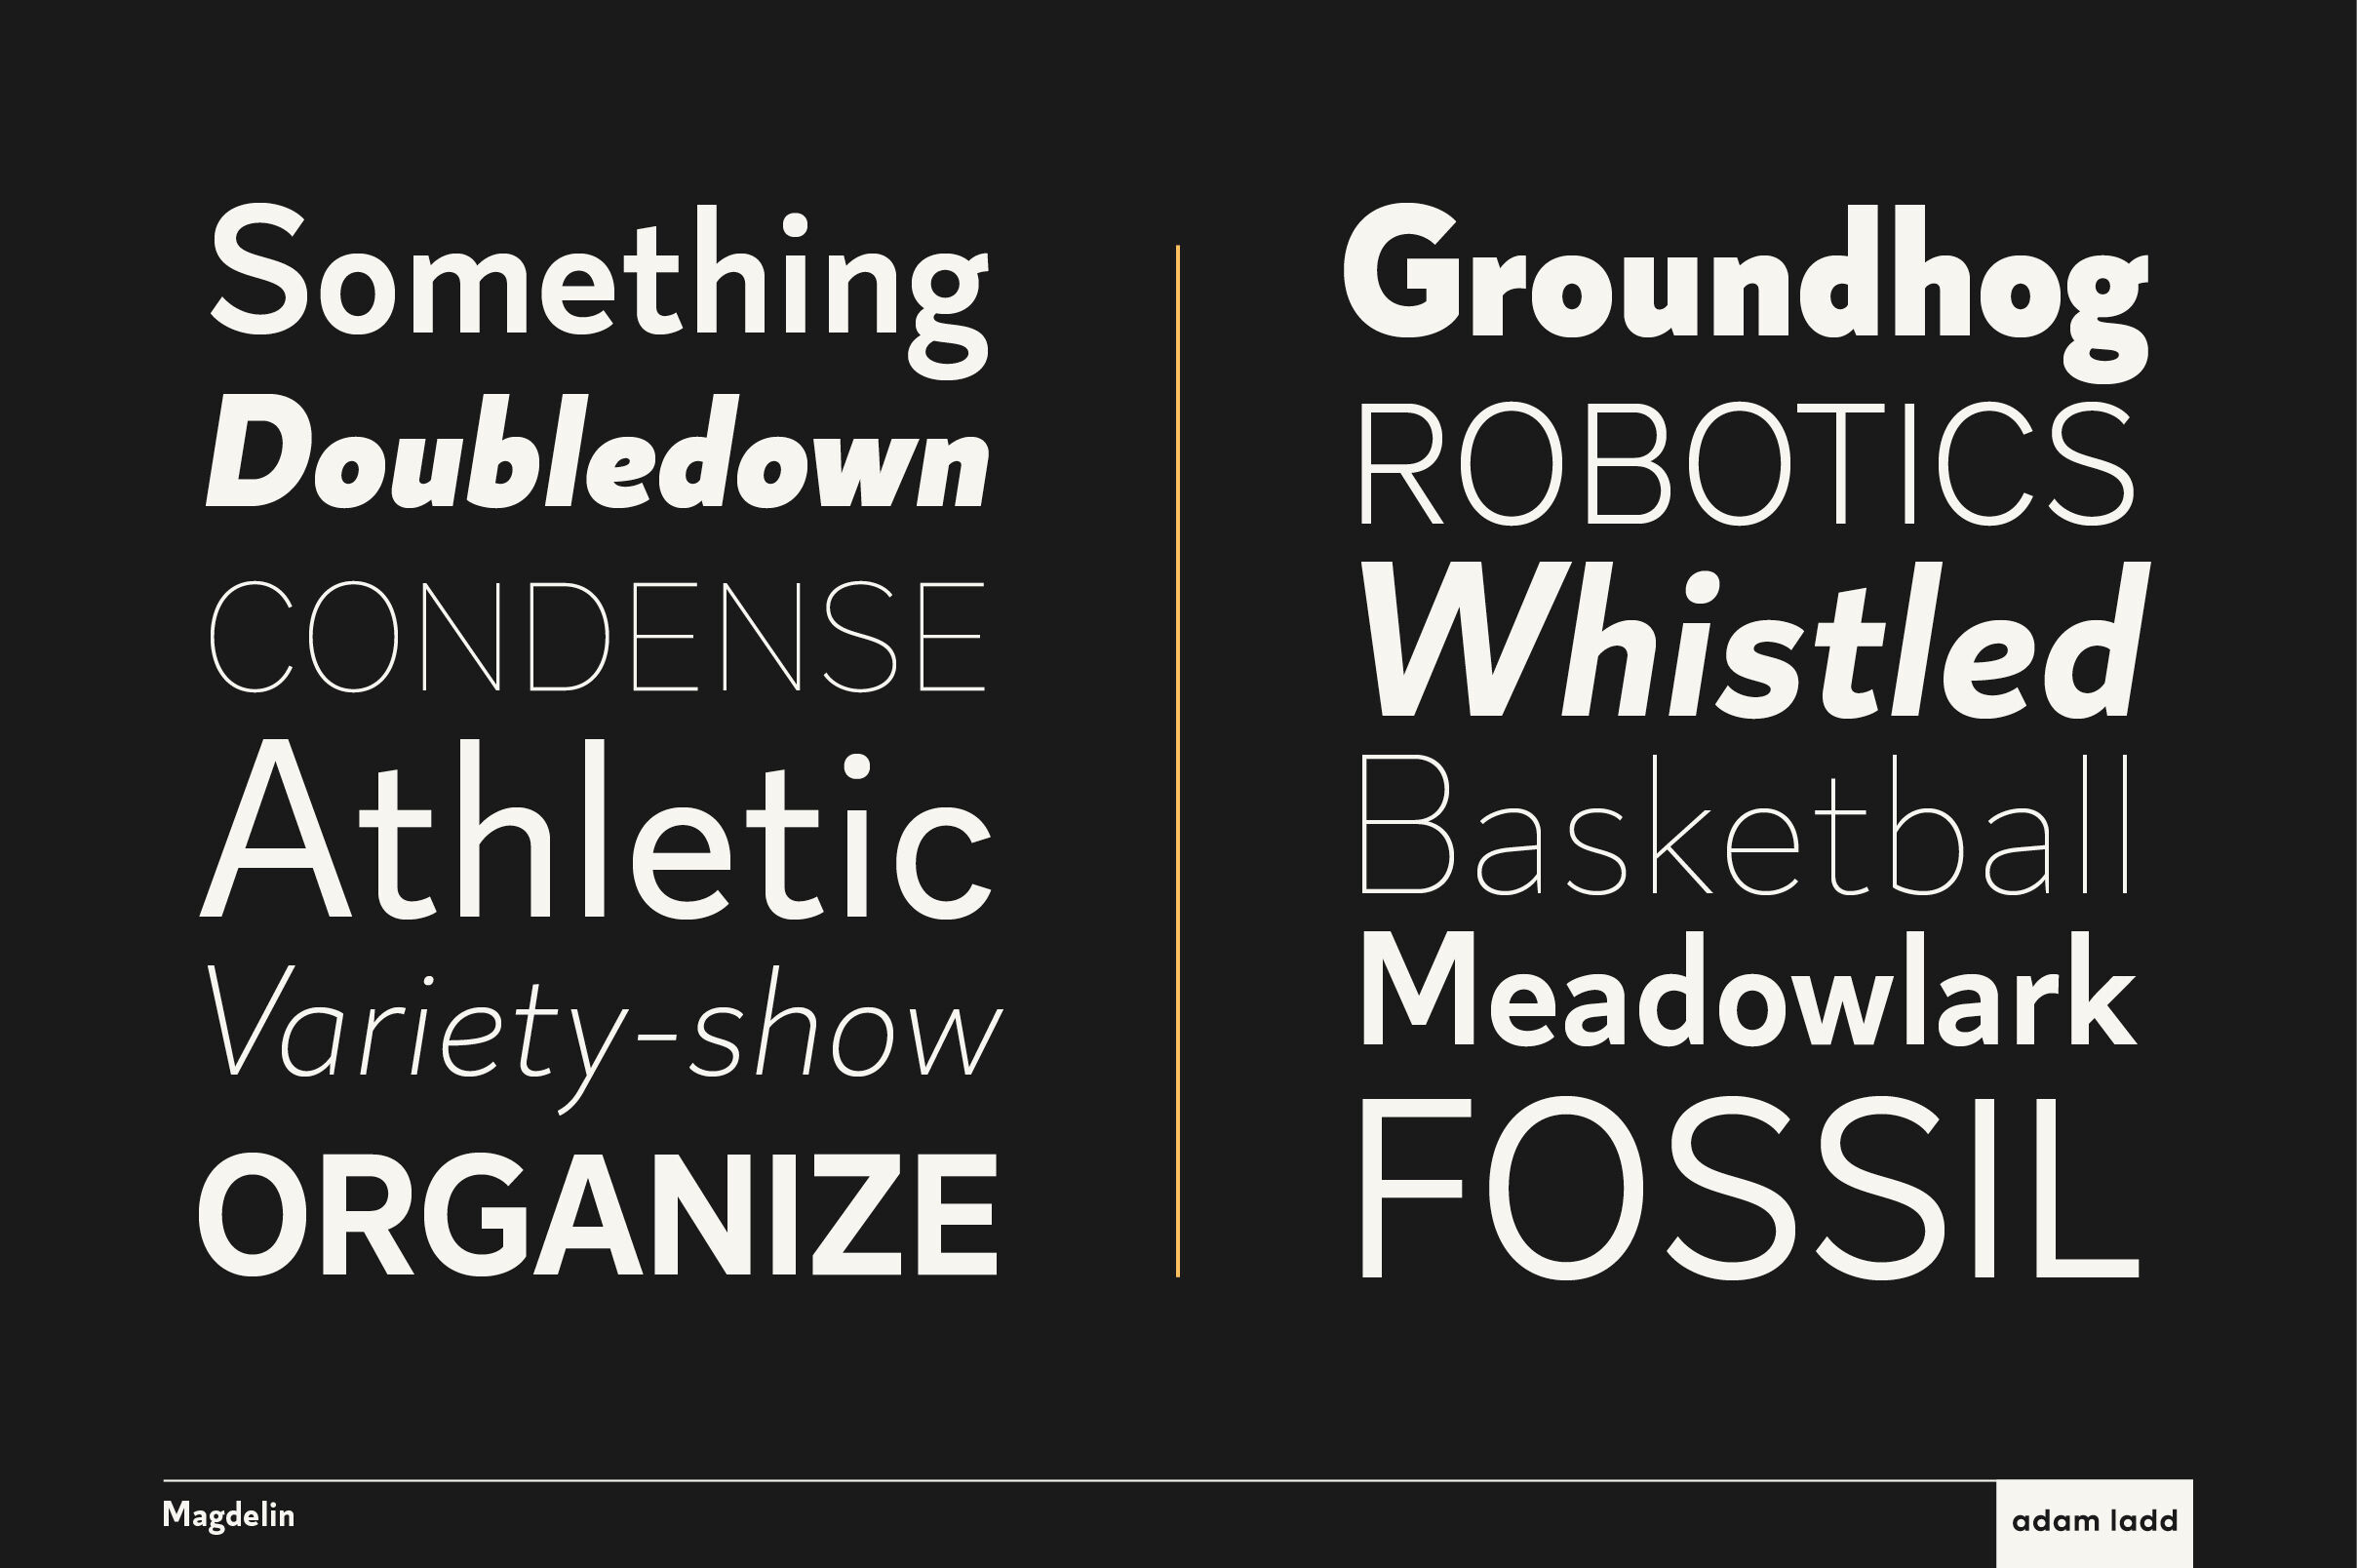 Magdelin Font Family By Adam Ladd Thehungryjpeg Com